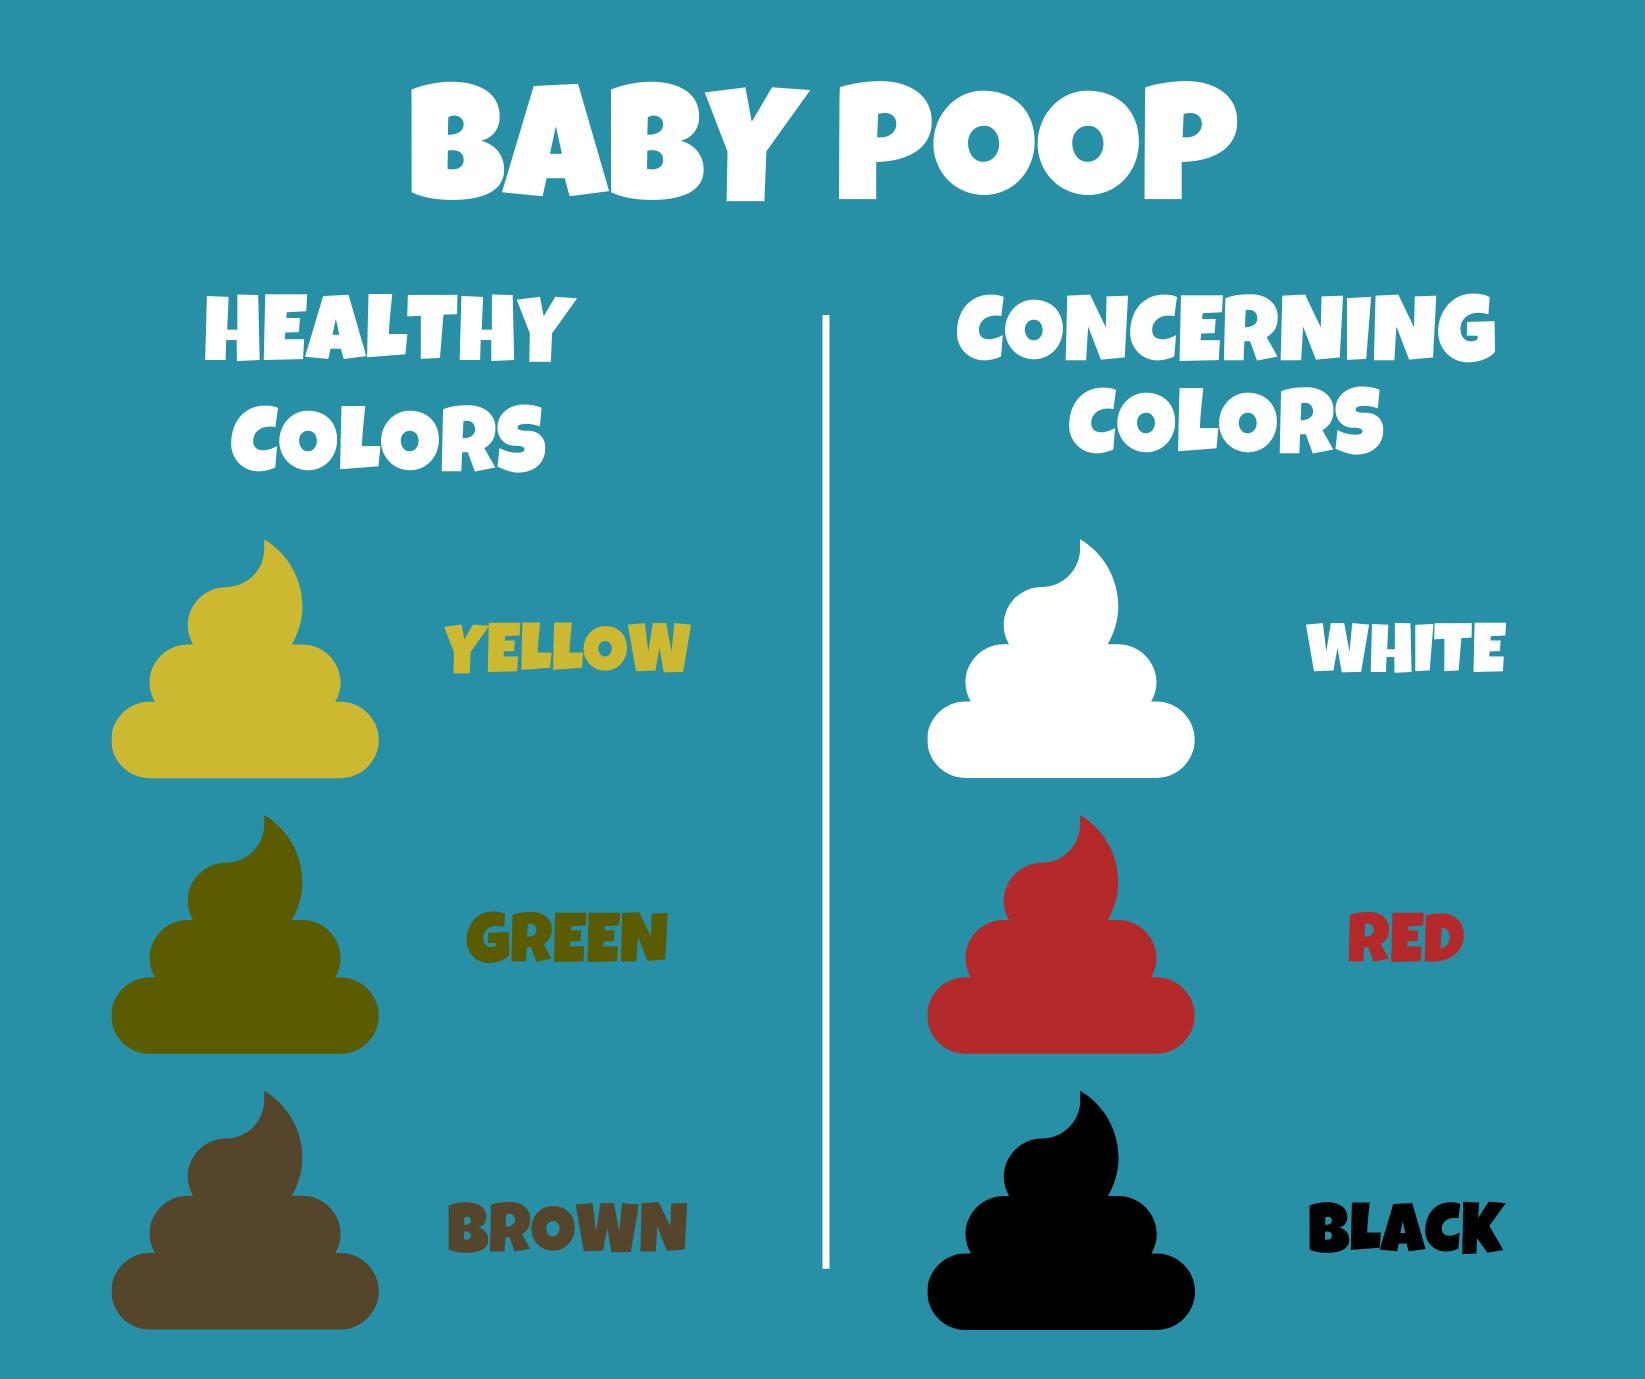 Baby Poop Colors: What’s Normal or Not - Pediatrics West